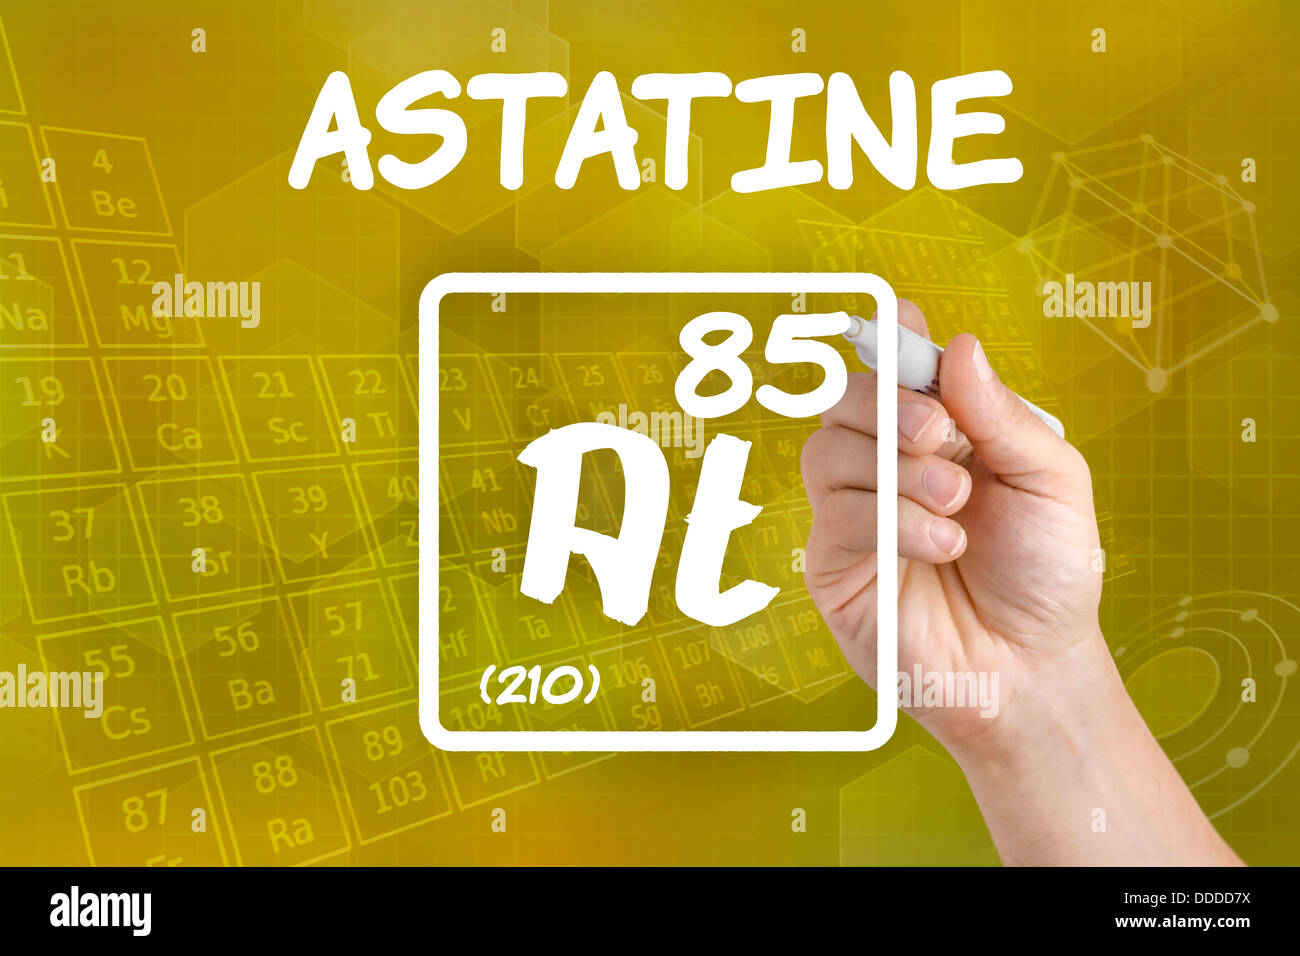 Symbol for the chemical element astatine Stock Photo